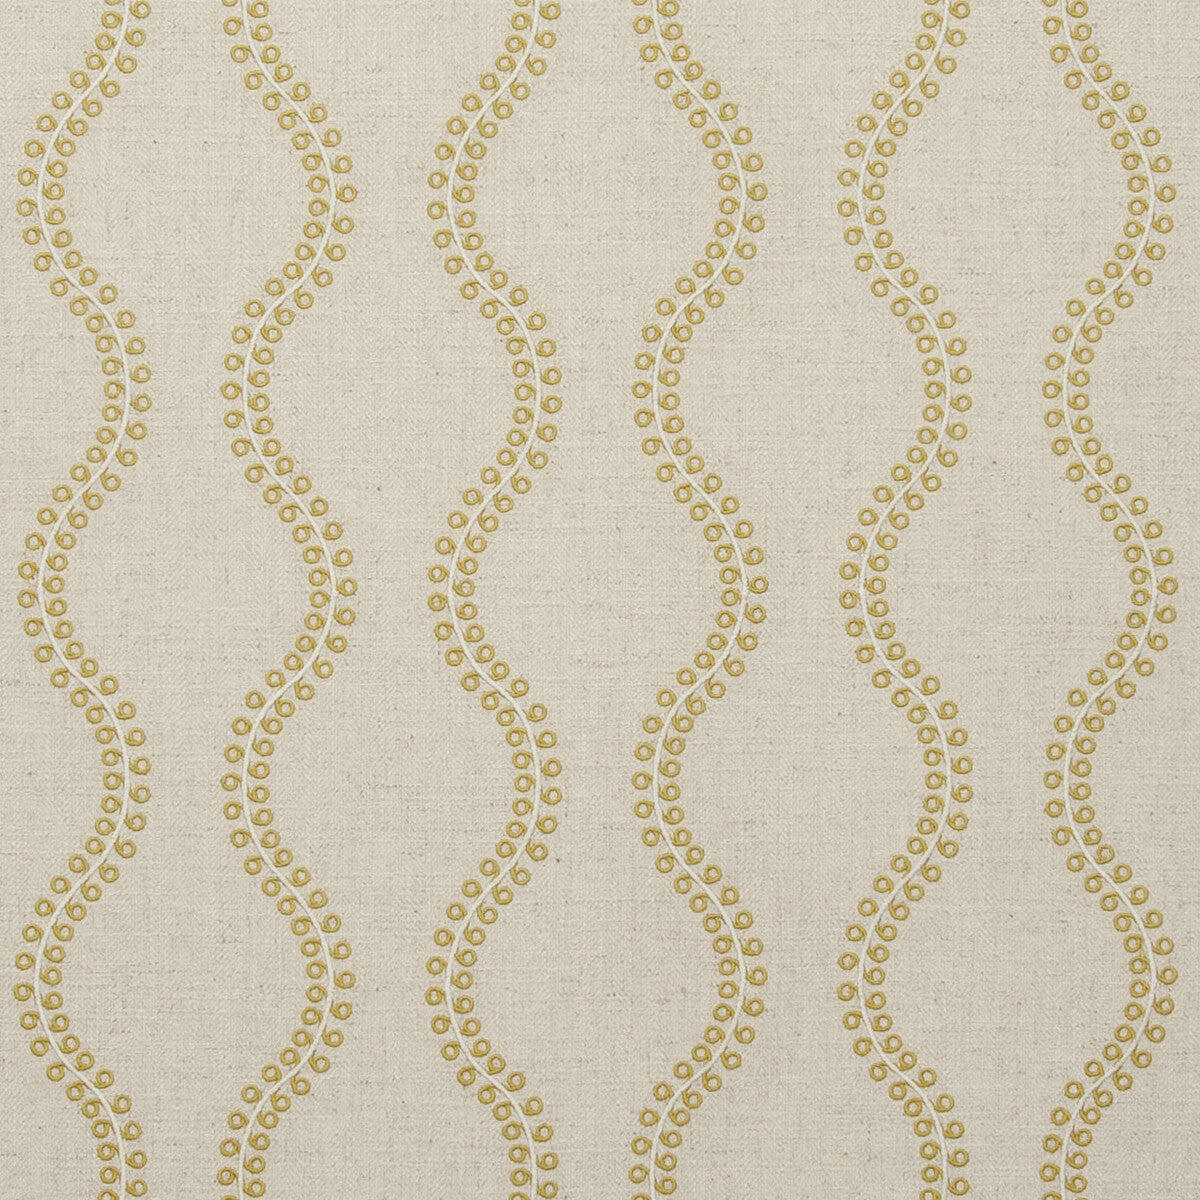 Woburn fabric in acacia color - pattern F0741/01.CAC.0 - by Clarke And Clarke in the Clarke &amp; Clarke Manor House collection